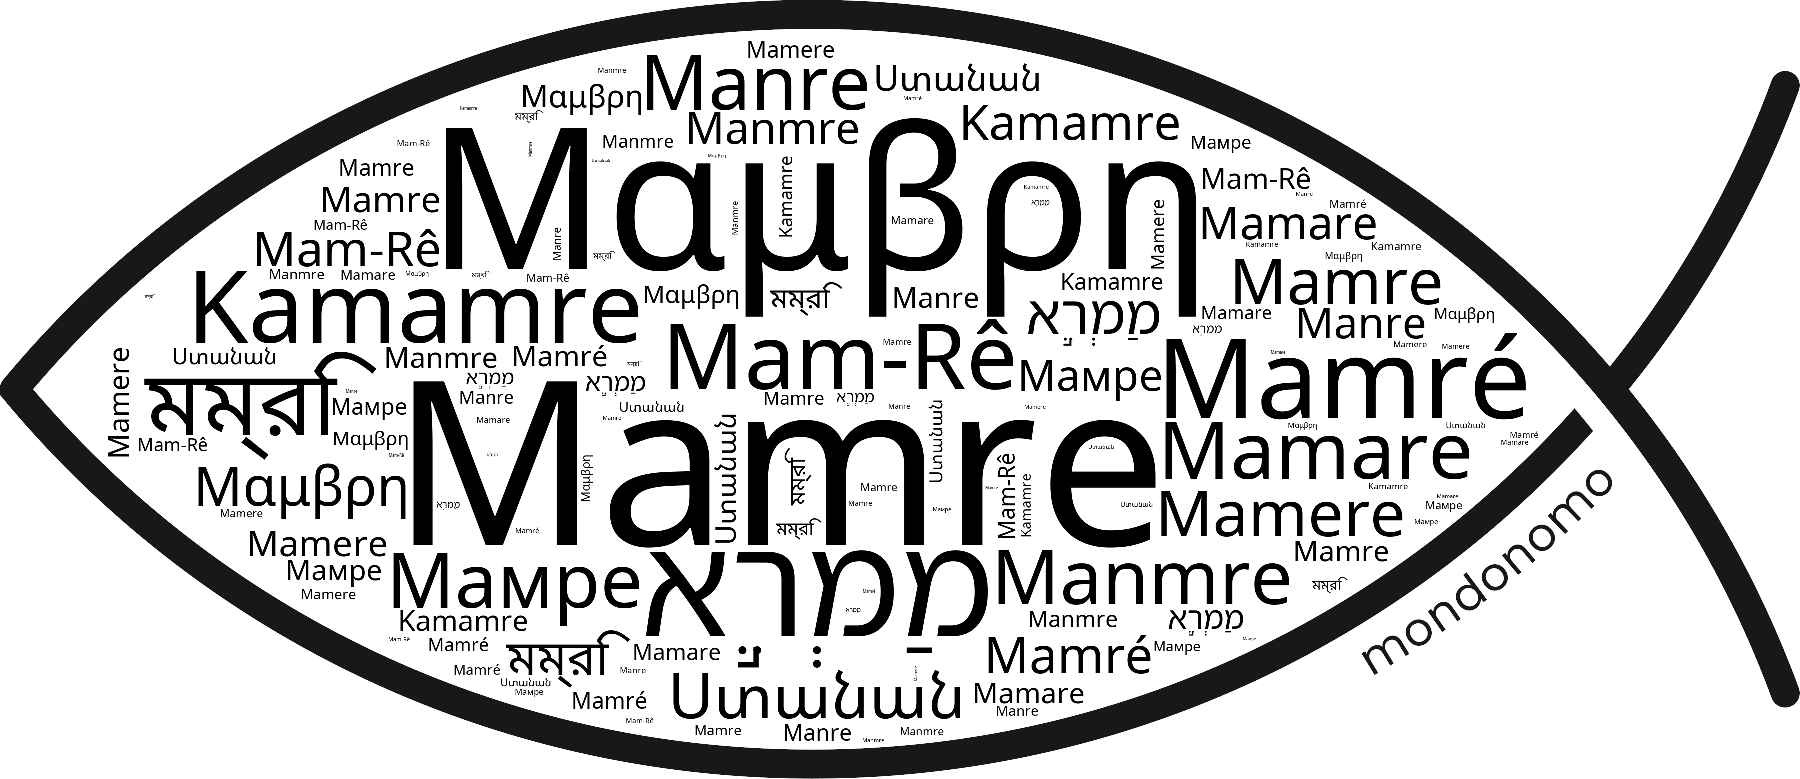 Name Mamre in the world's Bibles